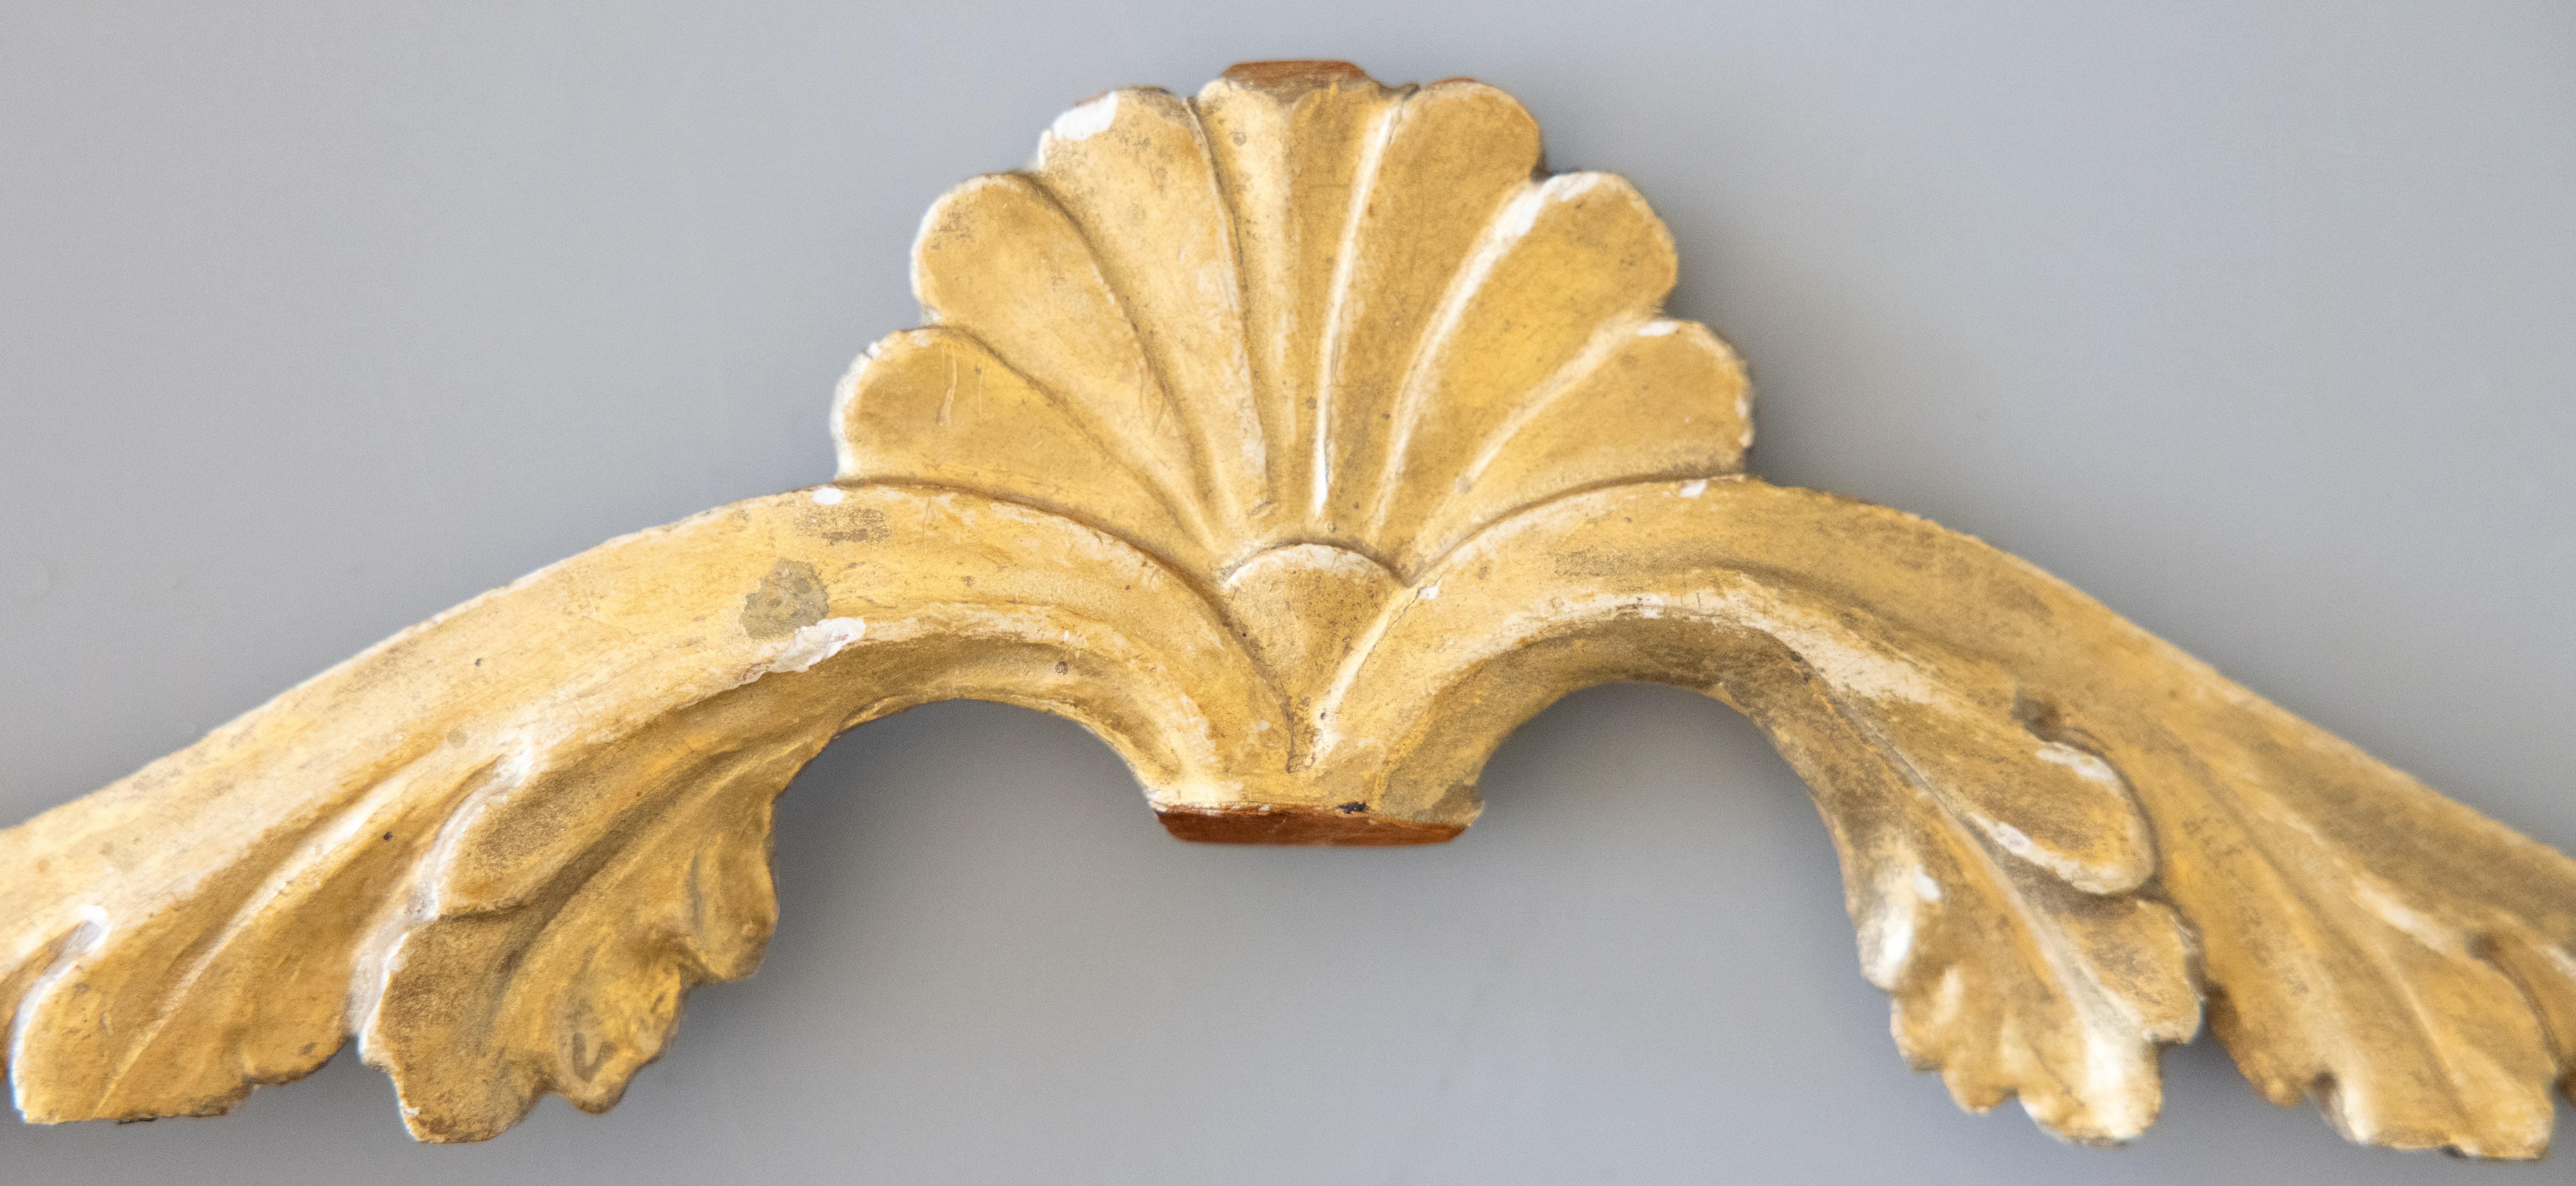 A gorgeous antique 19th-Century Italian gilt wood pediment / architectural fragment / wall swag / hanging wall ornament. This stunning architectural element has a lovely shell centerpiece with carved scrolling leaves and retains the beautiful